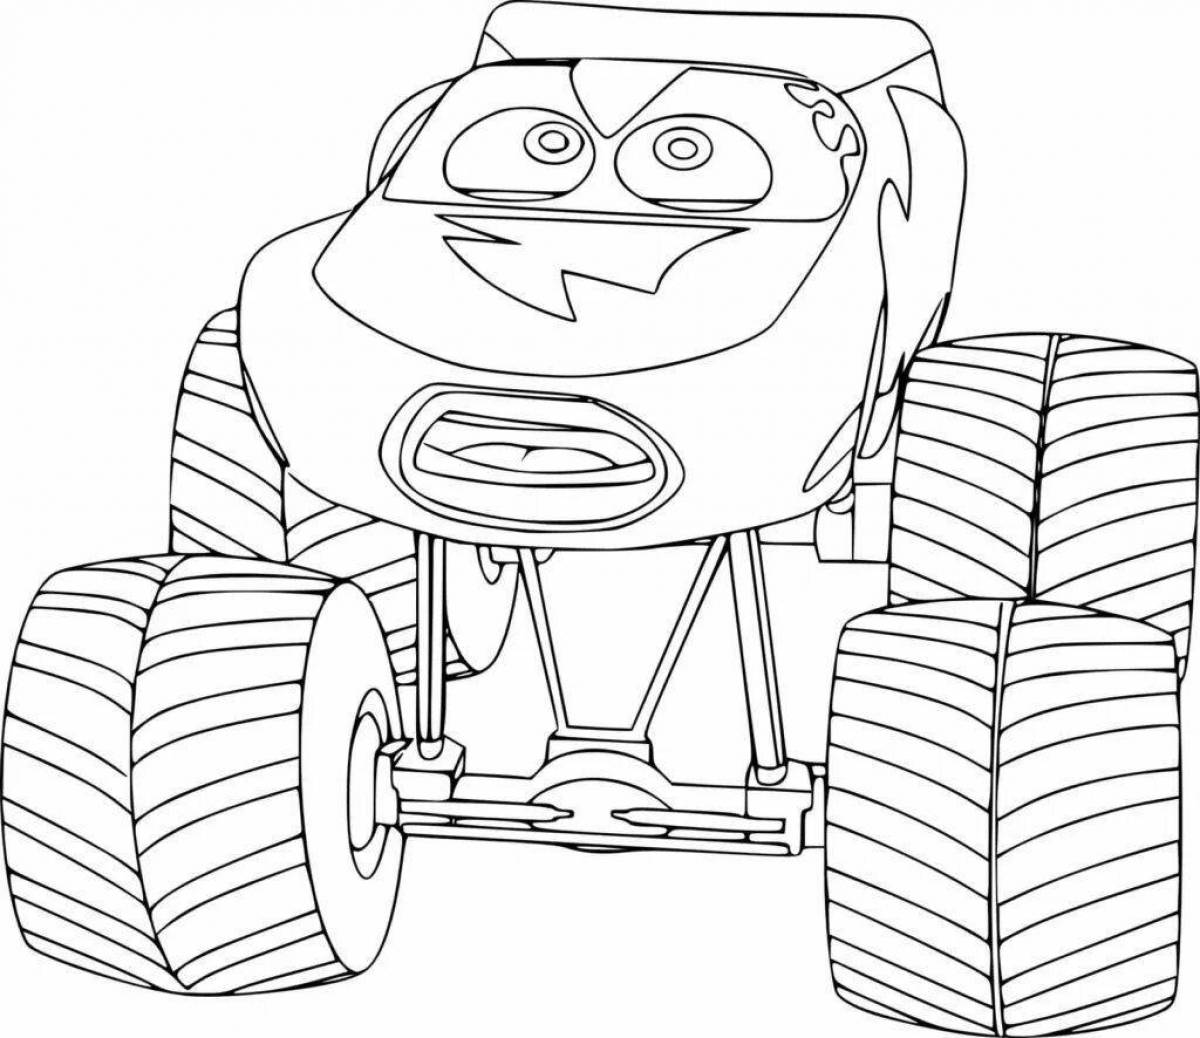 Radiant super car coloring page